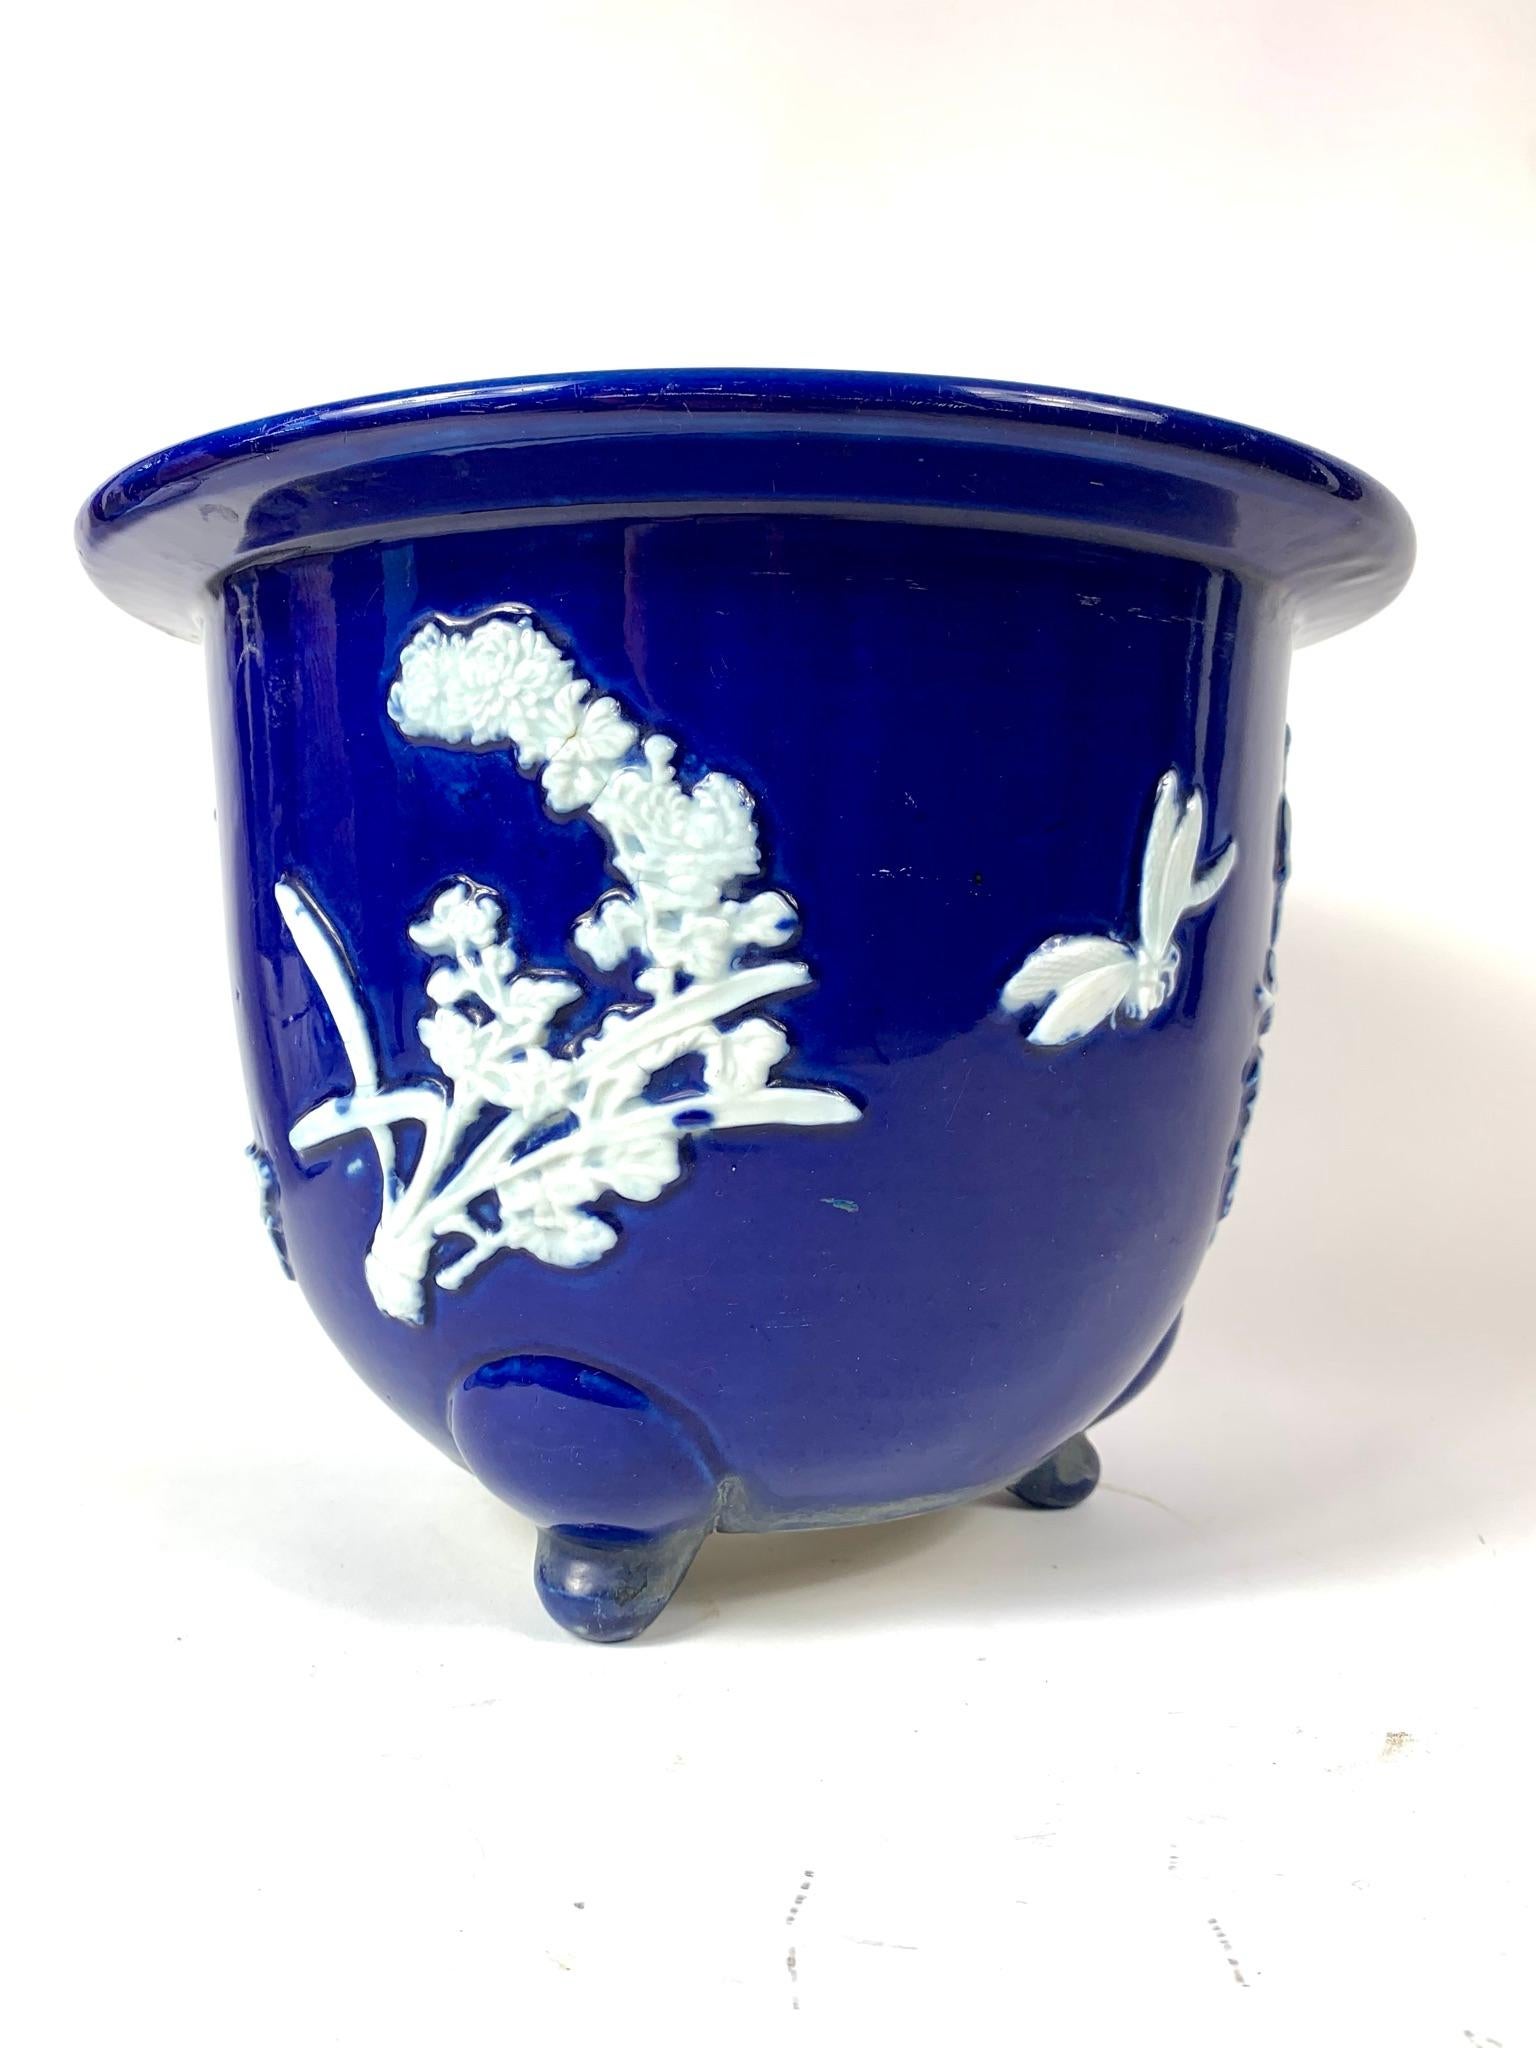 Chinese Pâte-sur-pâte jardinière in cobalt with raised white area decorated with flowers, butterfly and dragonflies. The bottom has three feet and a hole for water to drain through.

From Wikipedia:
Pâte-sur-pâte is a French term meaning 